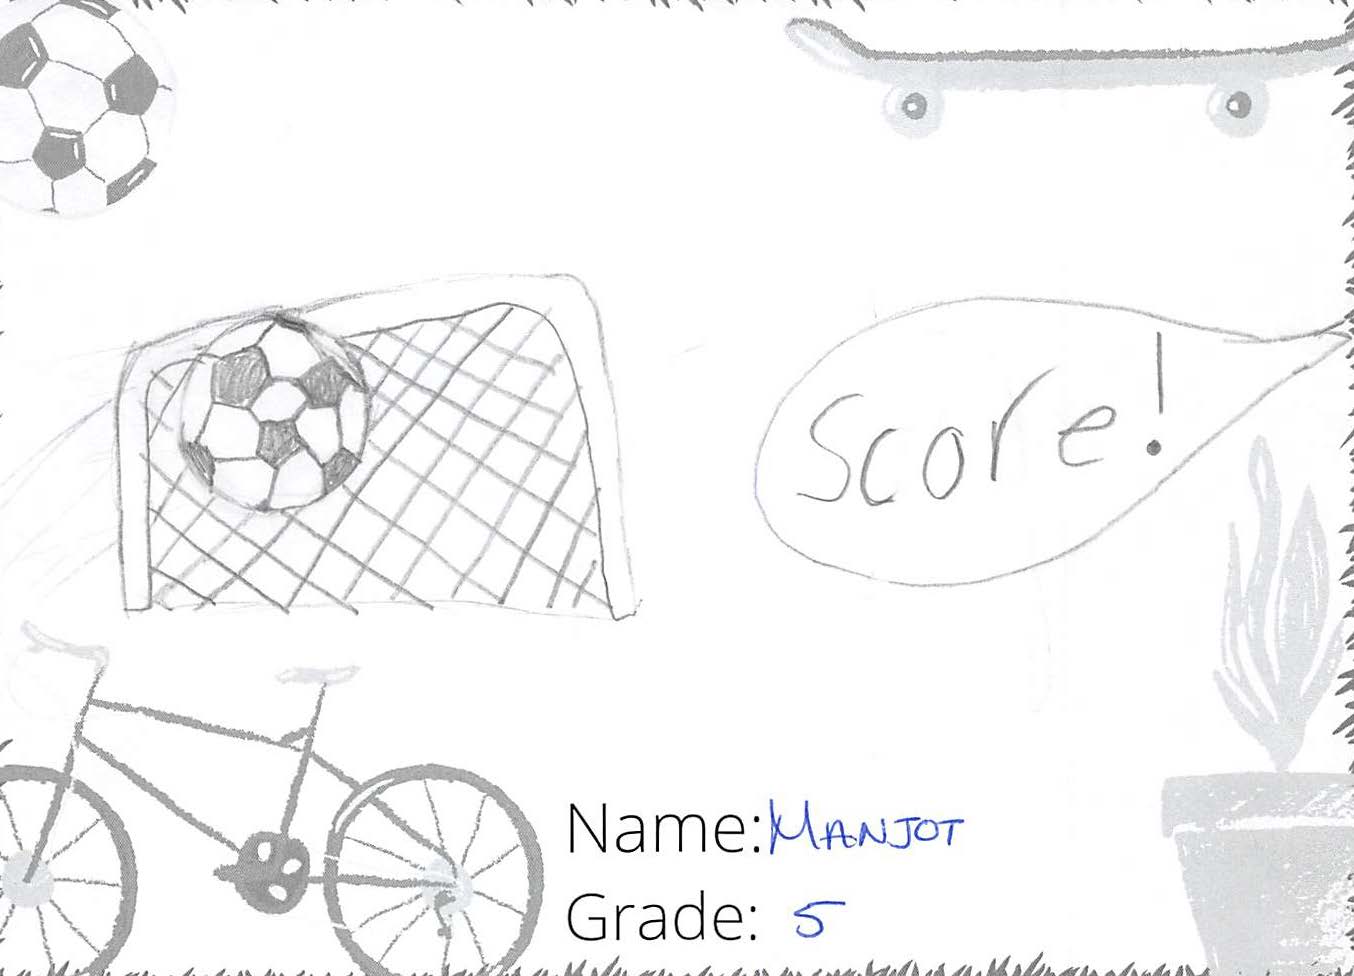 Pencil crayon drawing for the SCORE! logo contest. The drawing includes a soccer ball in a soccer net.